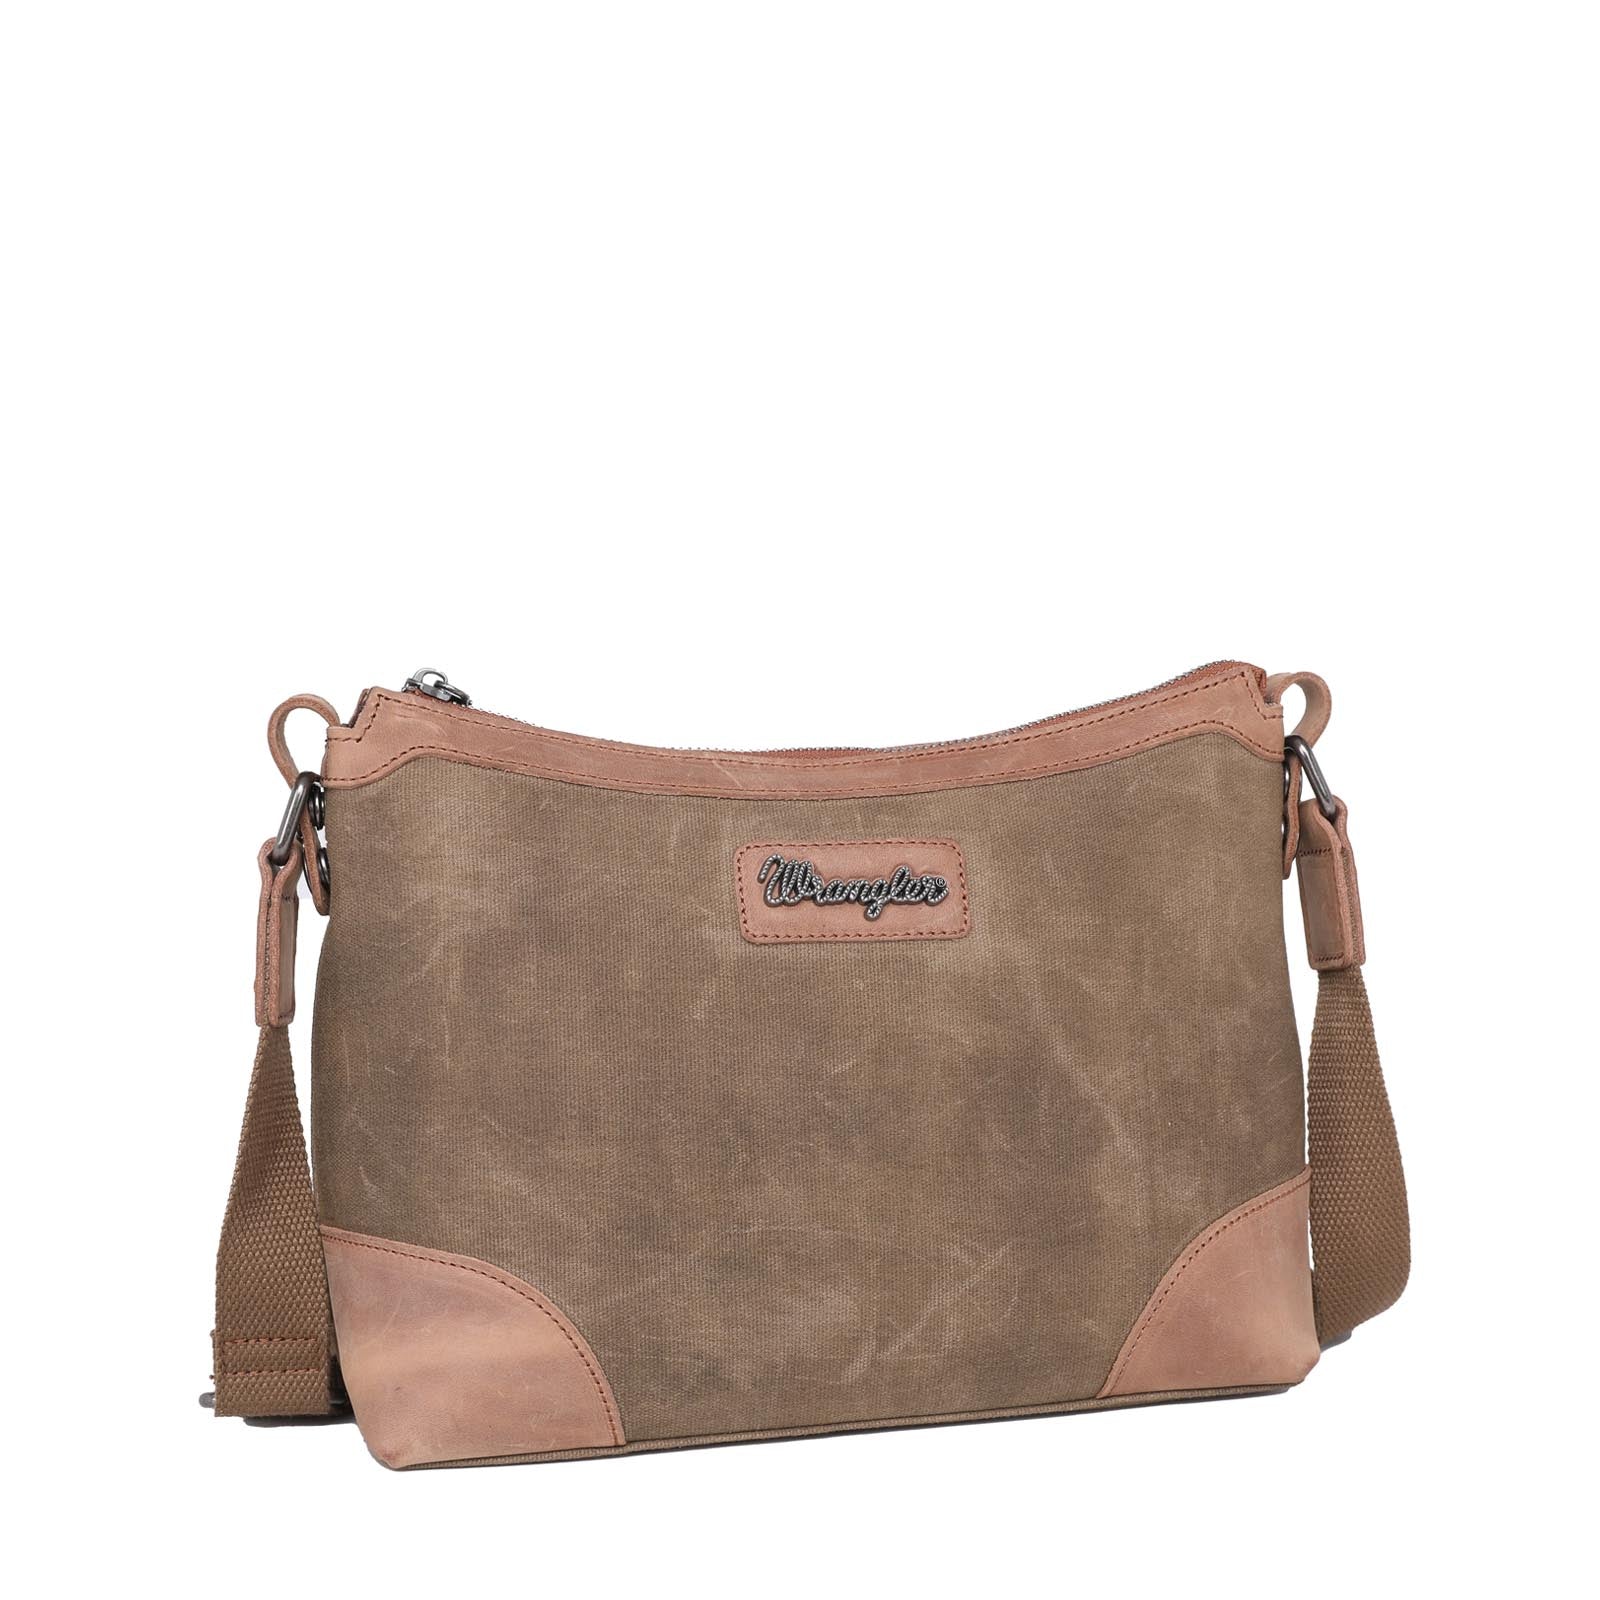 Wrangler Full Distressed Leather Concealed Carry Tote with detachable crossbody bag - Cowgirl Wear